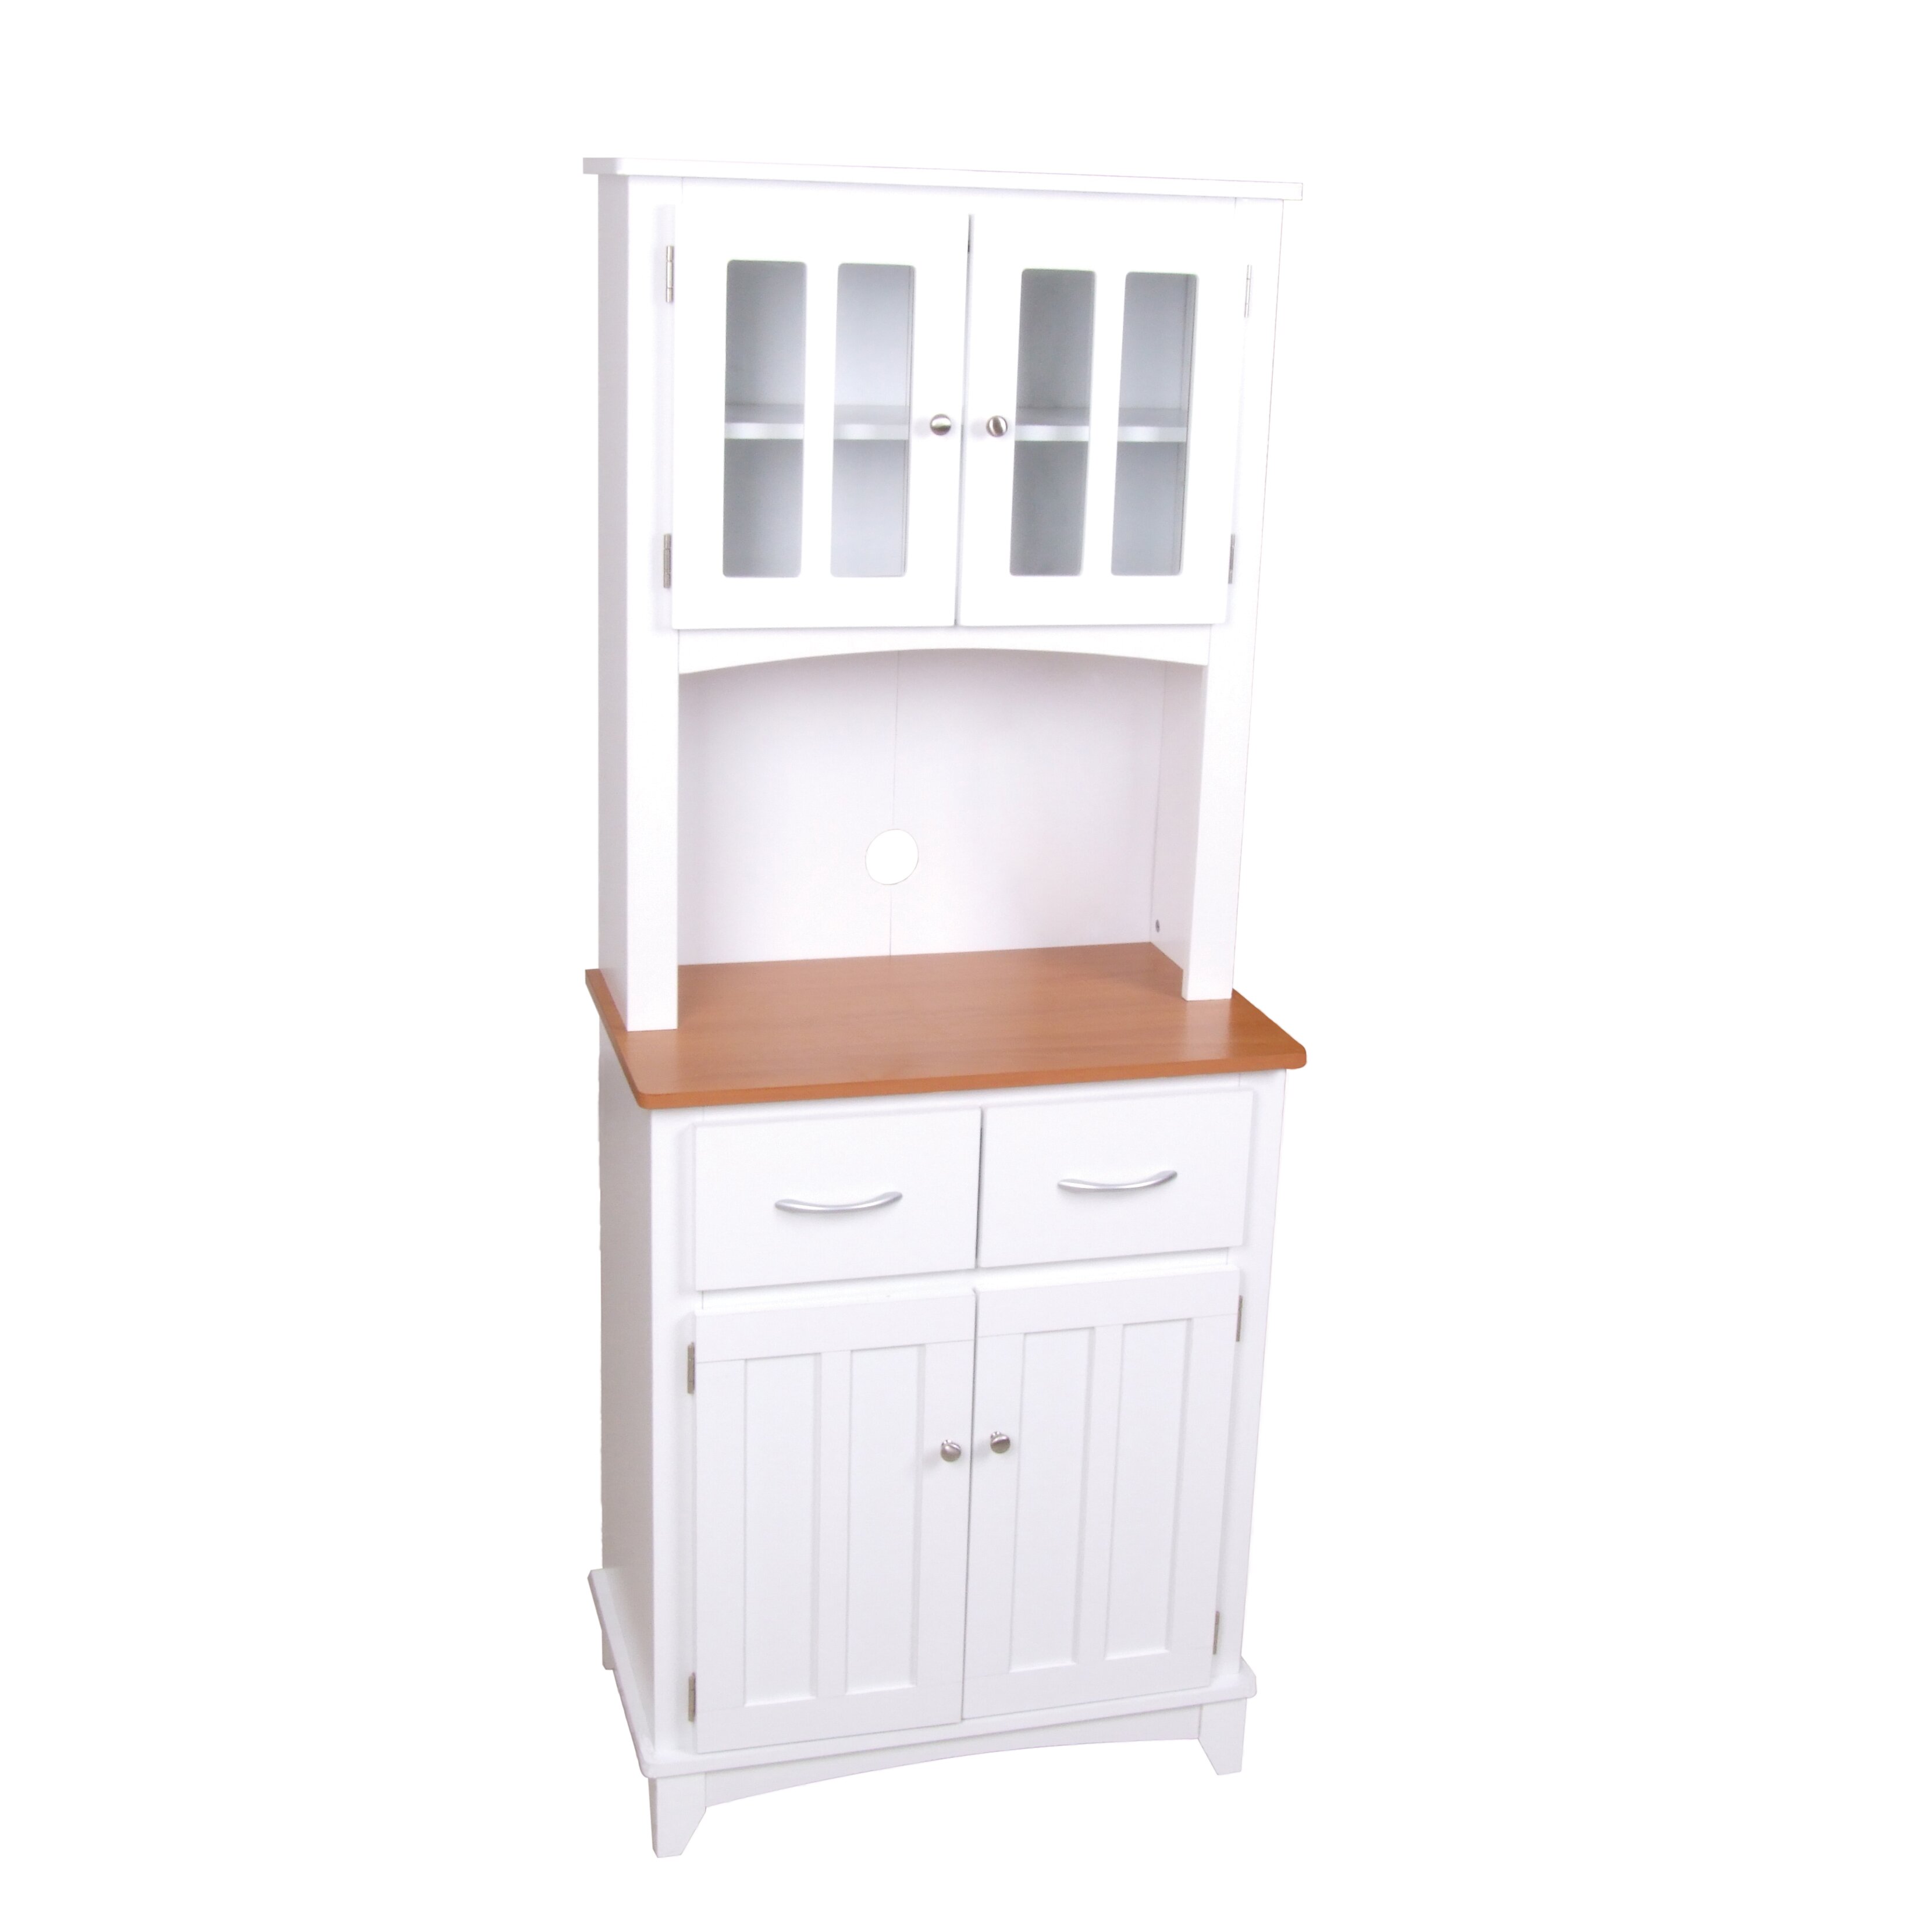 Pantry Cabinet Microwave Pantry Cabinet With Microwave Insert